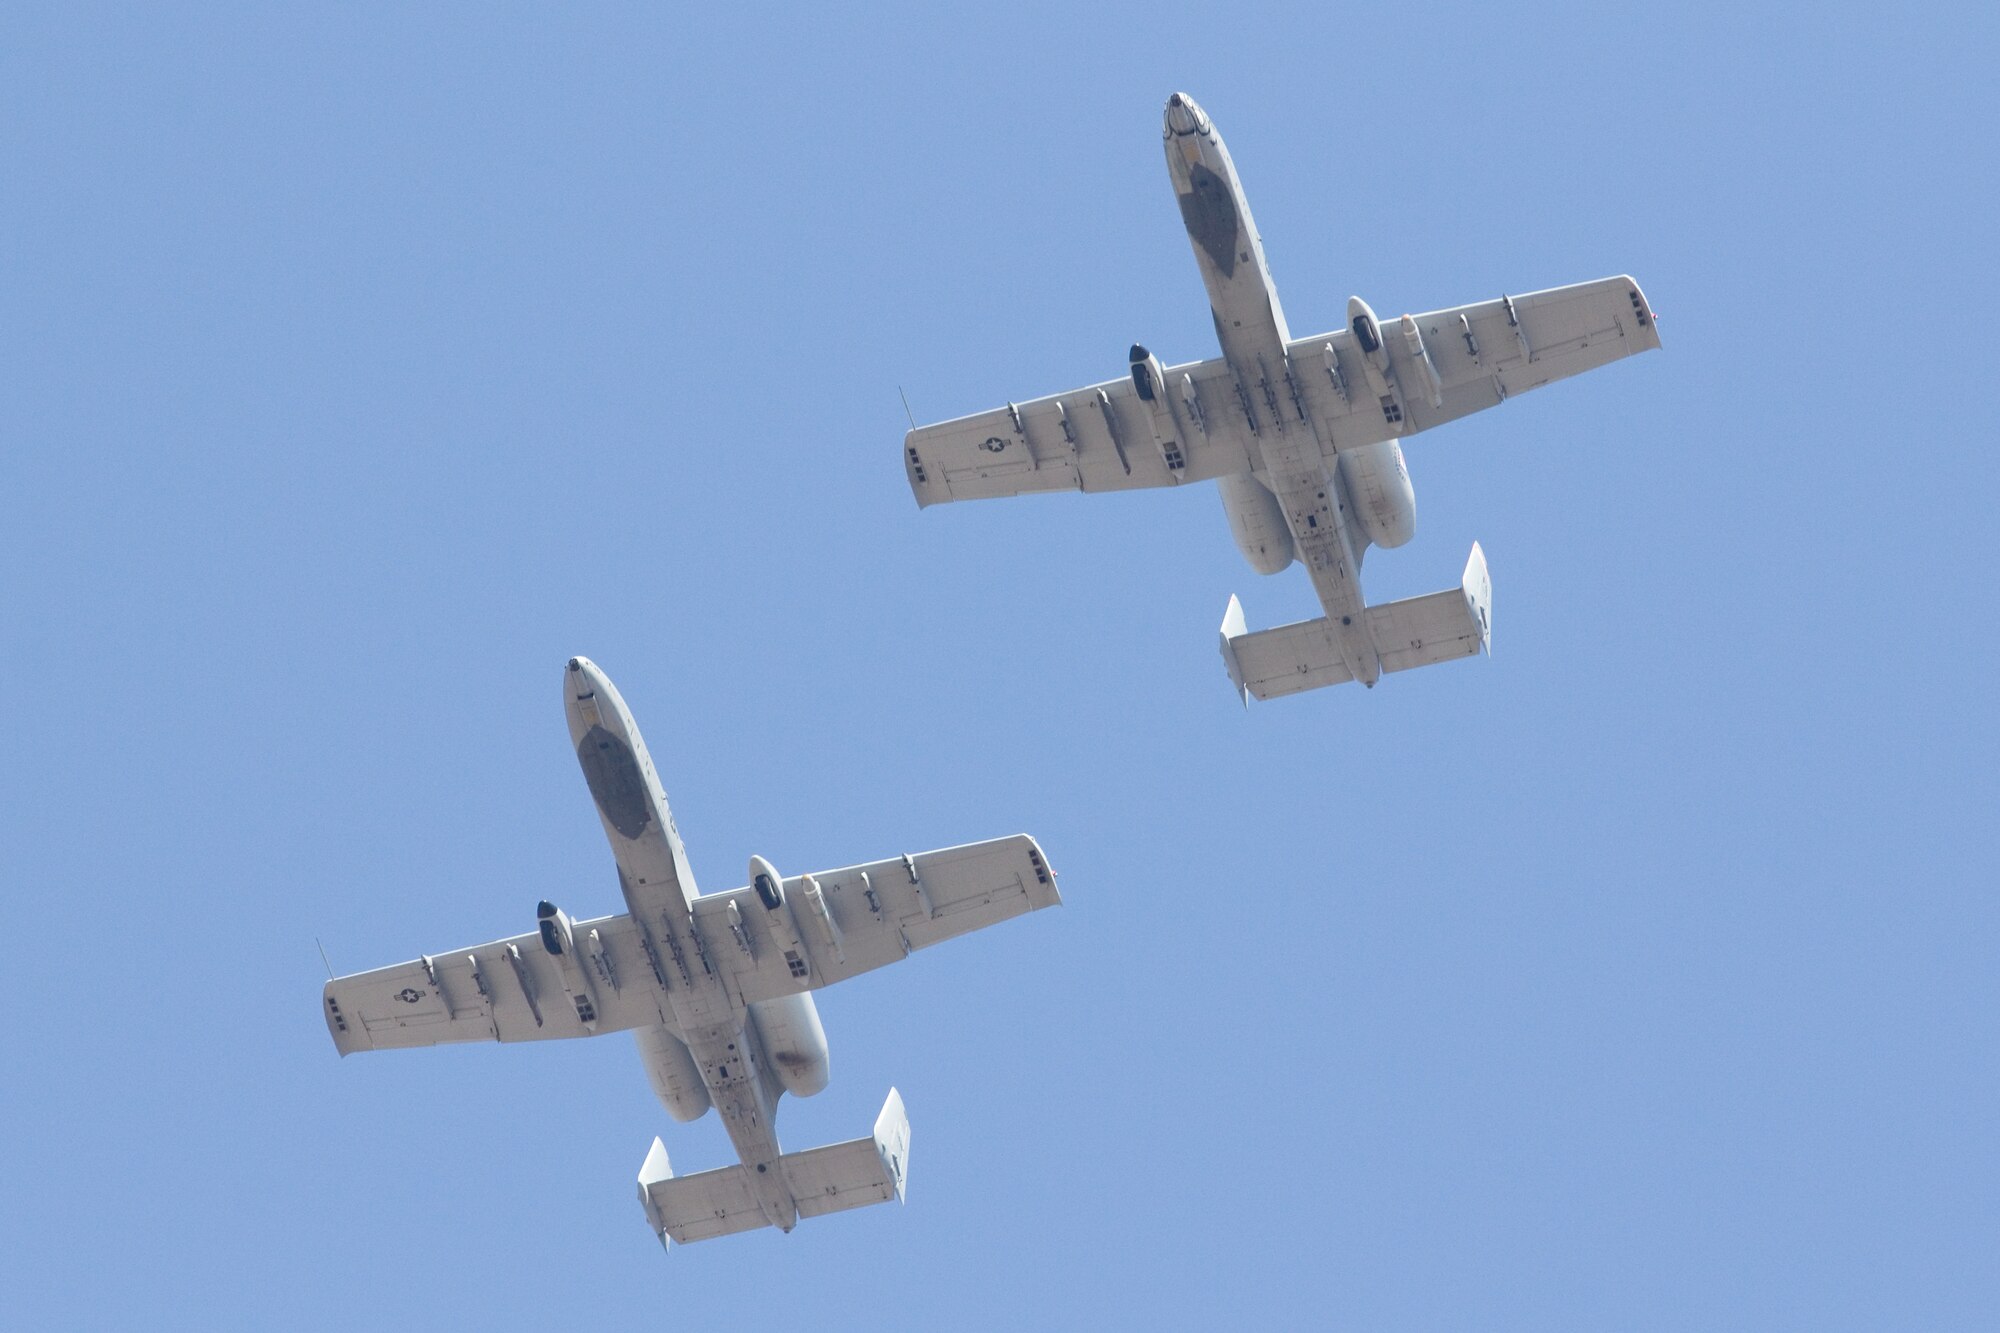 Lt. Col. Marty Dahlem (Tail No. 638) and Maj. Doug Davis (Tail No. 188), pilots with the 188th Fighter Wing, train at the 188th’s Detachment 1 Razorback Range March 25, 2014, during their fini flights in the A-10C Thunderbolt II “Warthog.” Dahlem is the 188th Operations Support Squadron commander and Davis is the 188th Detachment 1 commander. (Courtesy photo by Nick Thomas)